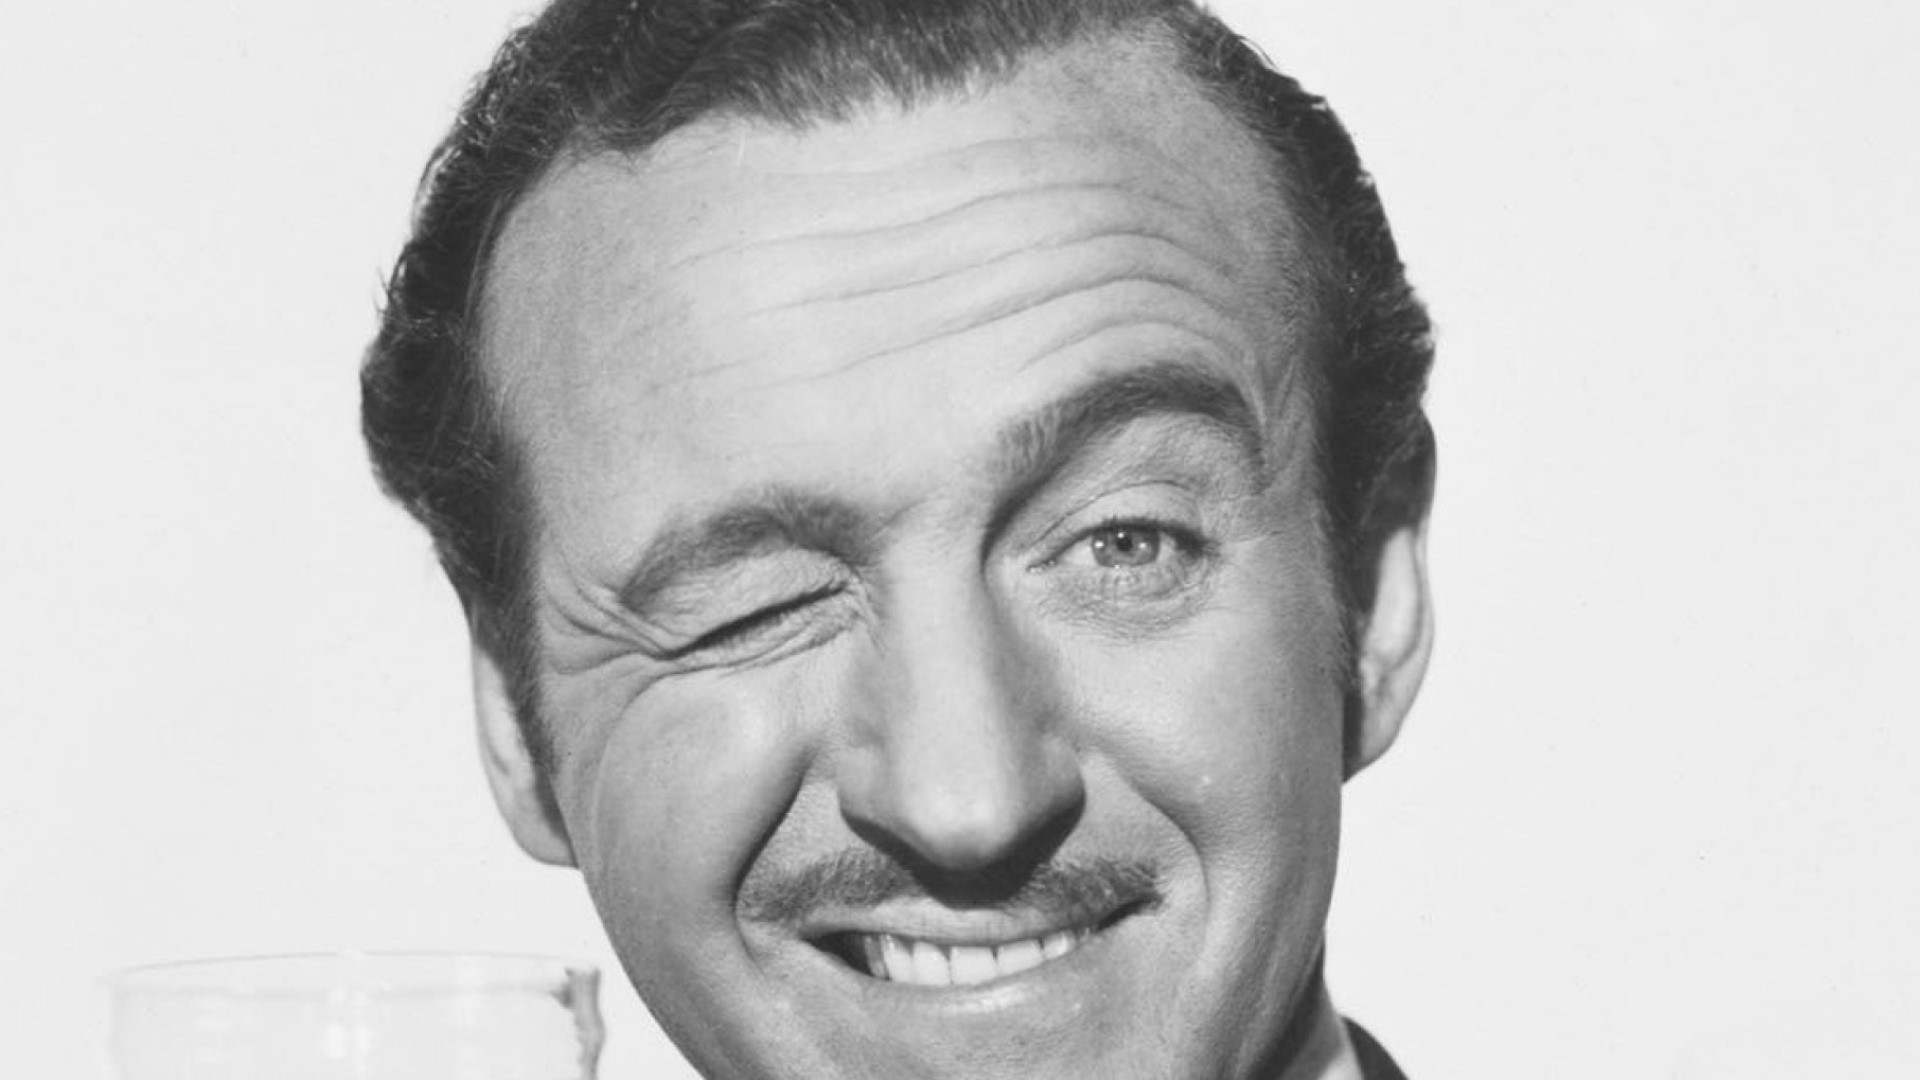 A life of tragedy and laughs: David Niven in photos